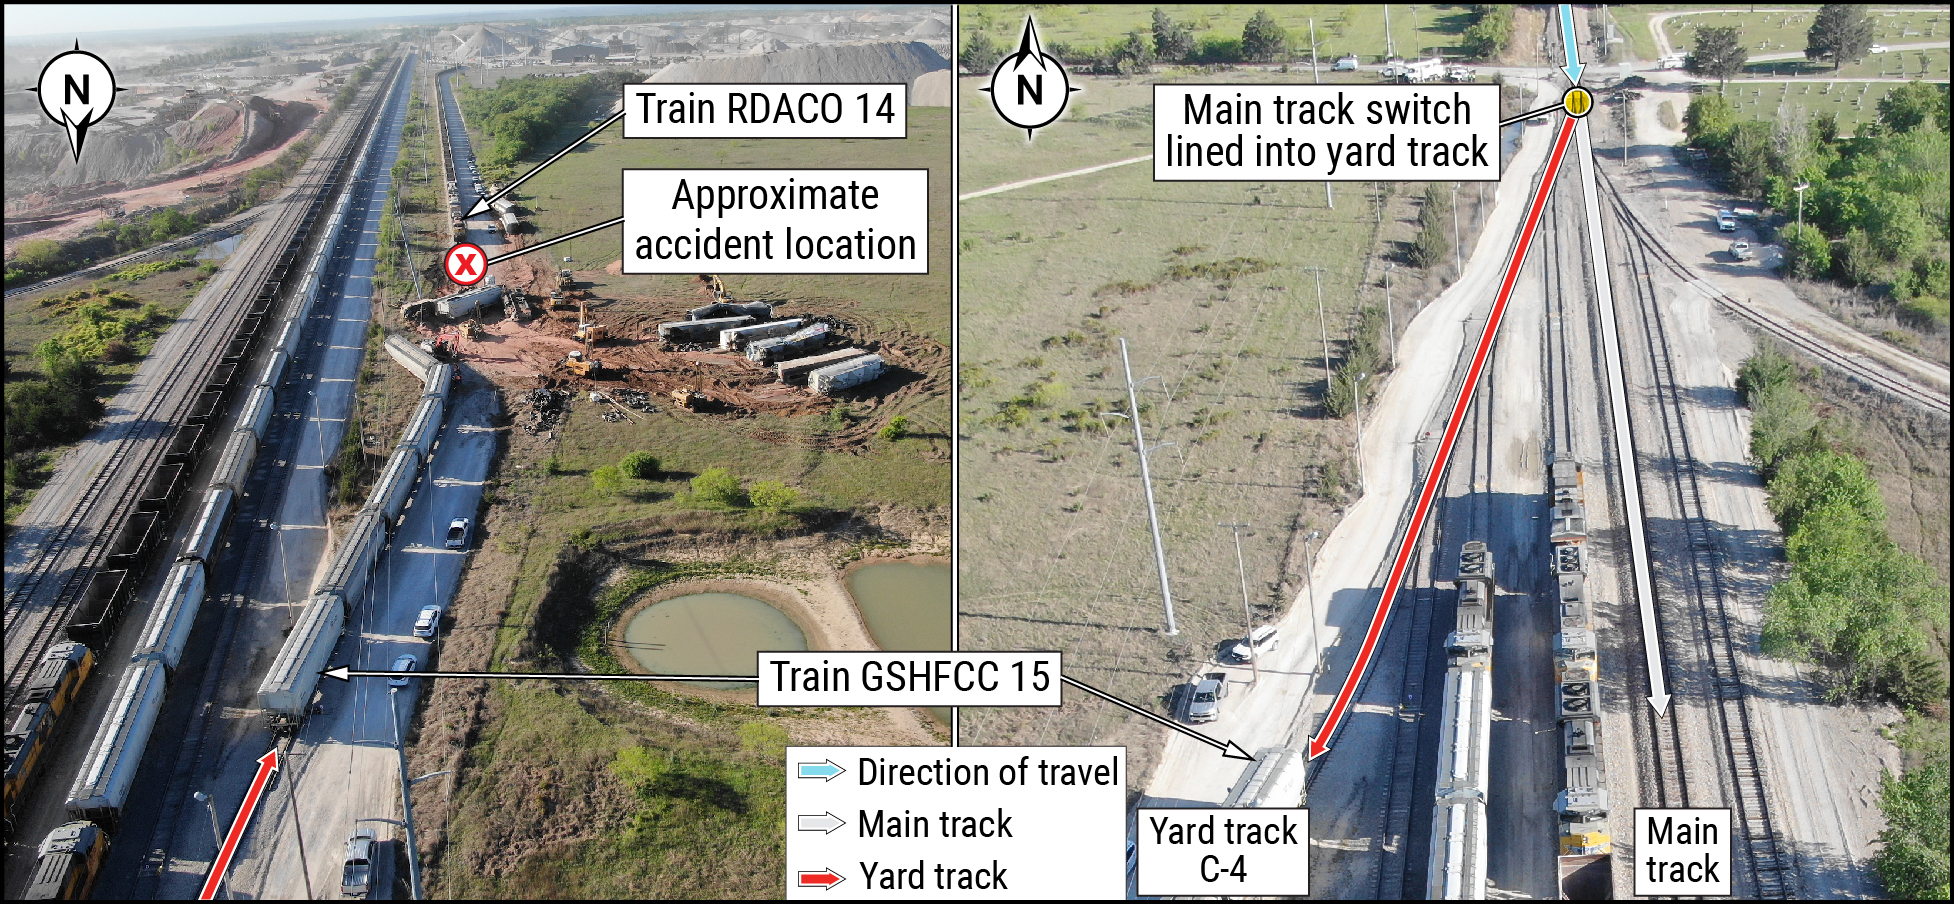 Aerial view of wreckage (left) and main track switch (right).